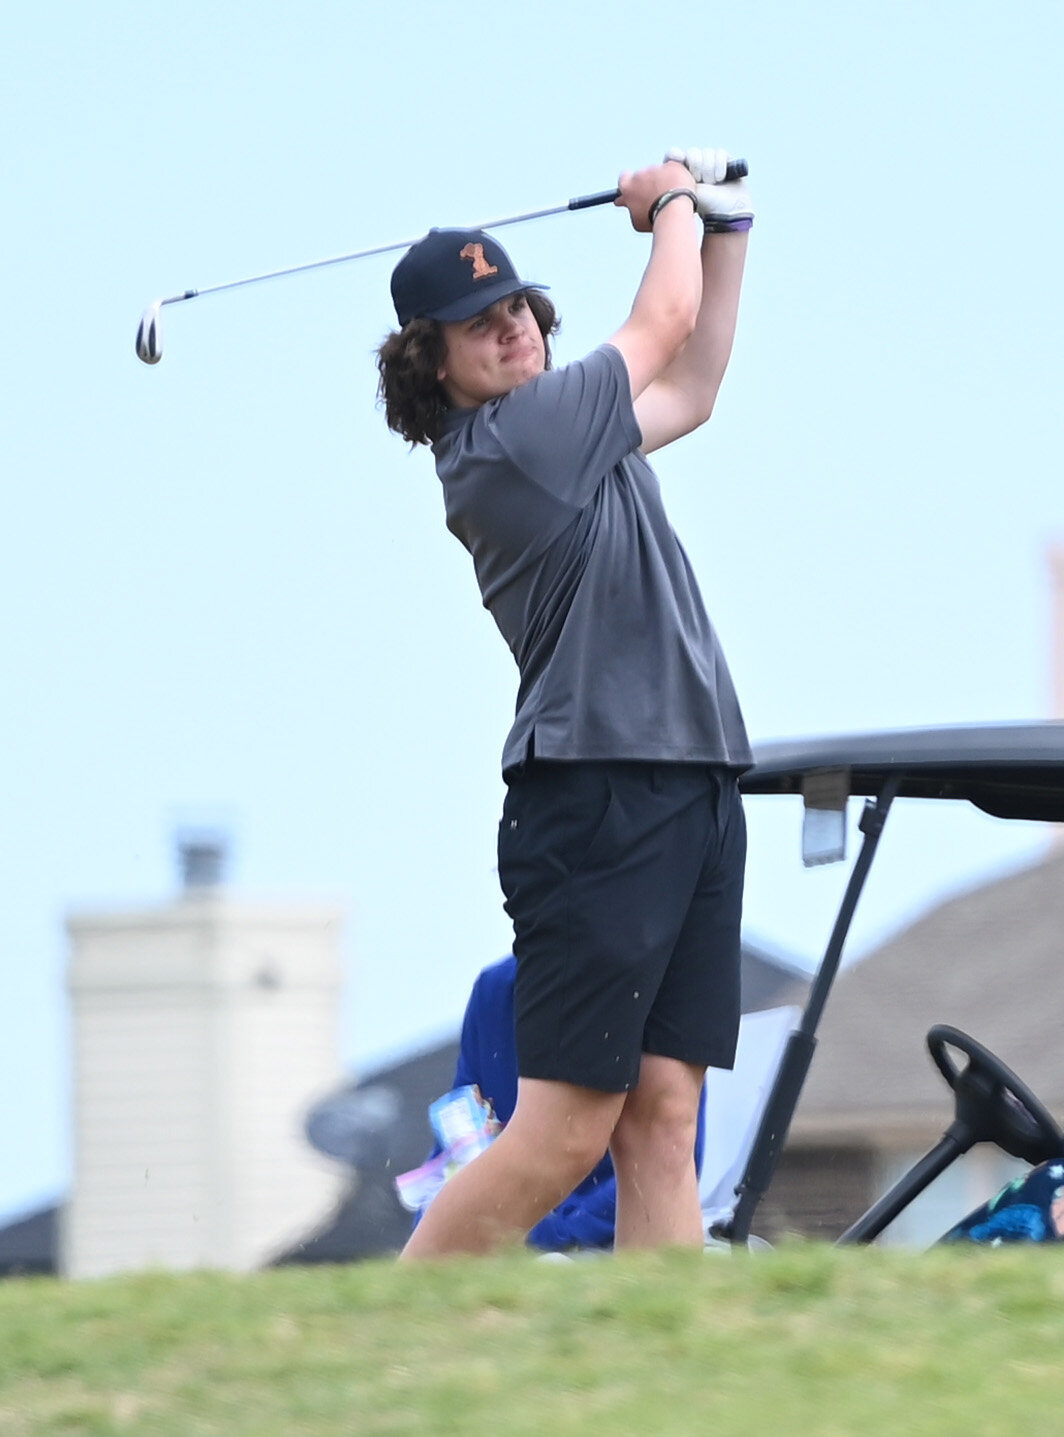 Washington golfer Logan Janaway watches his tee shot during the Regional golf tournament at Brent Bruehl Memorial Golf Course on Monday. Janaway shot 96-108 for a two-round total of 204.